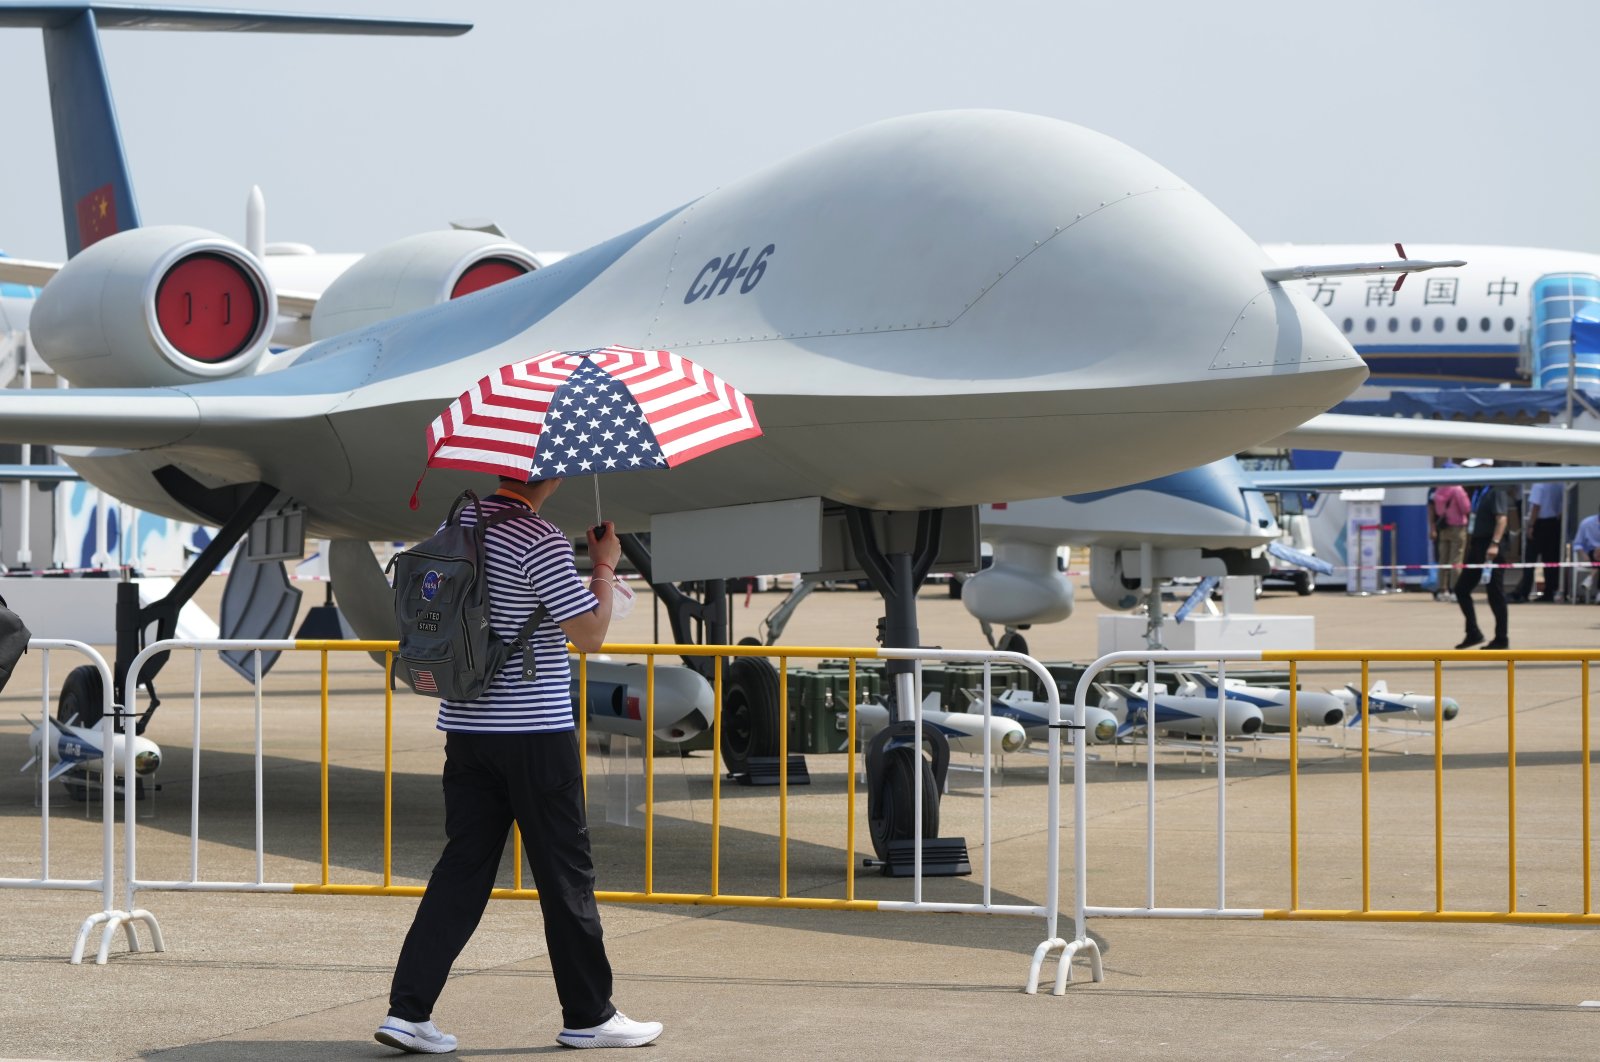 A man carrying an umbrella with the United States flag colors walks past the CH-6 drone during the 13th China International Aviation and Aerospace Exhibition, also known as Airshow China 2021, in Zhuhai in southern China's Guangdong province, Sept. 28, 2021. (AP Photo)